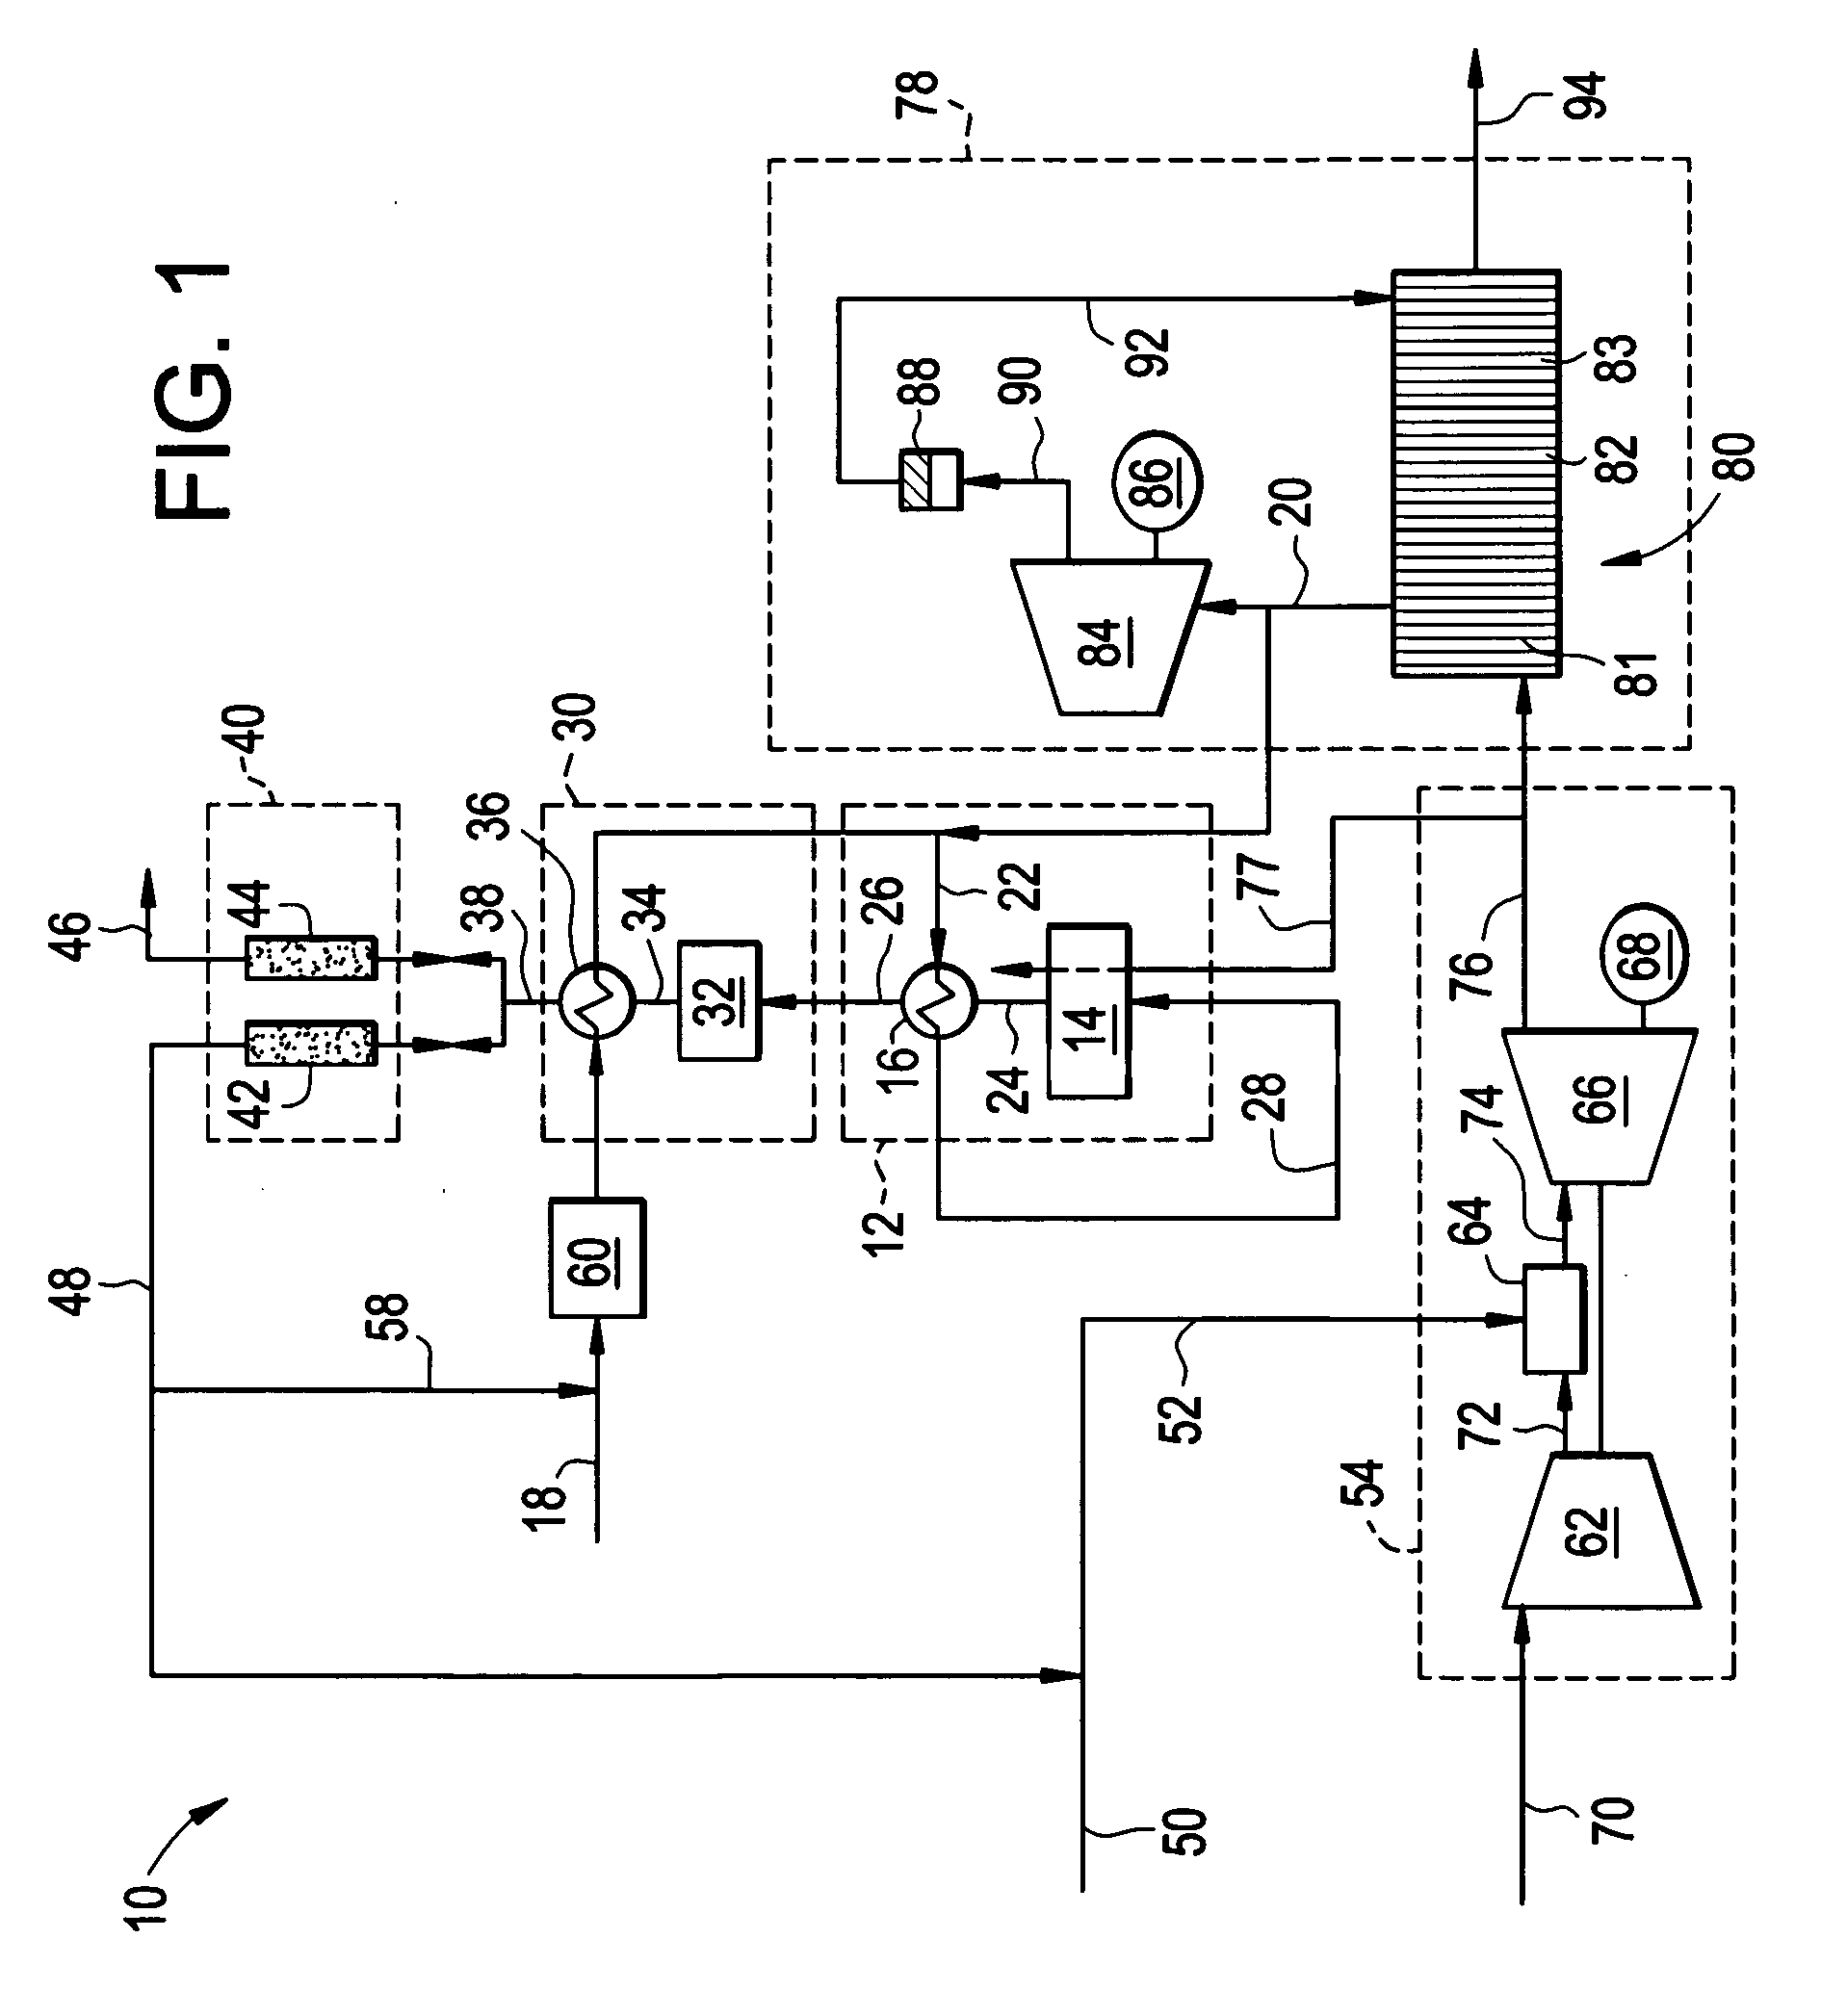 Reforming system for combined cycle plant with partial CO2 capture